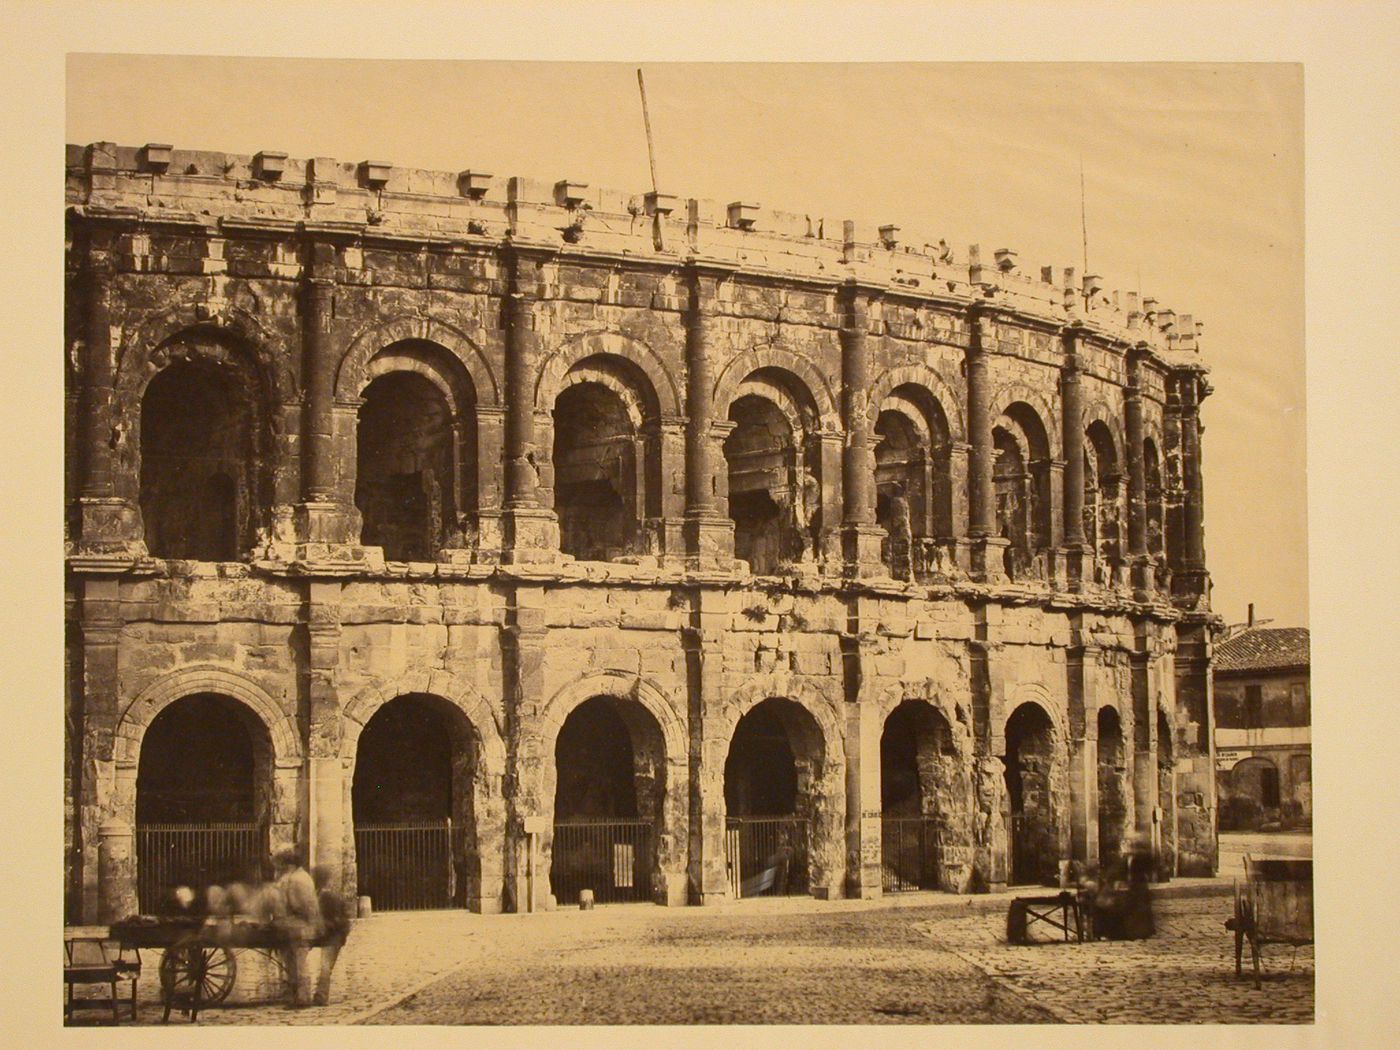 Exterior view of amphitheater, Nîmes, France